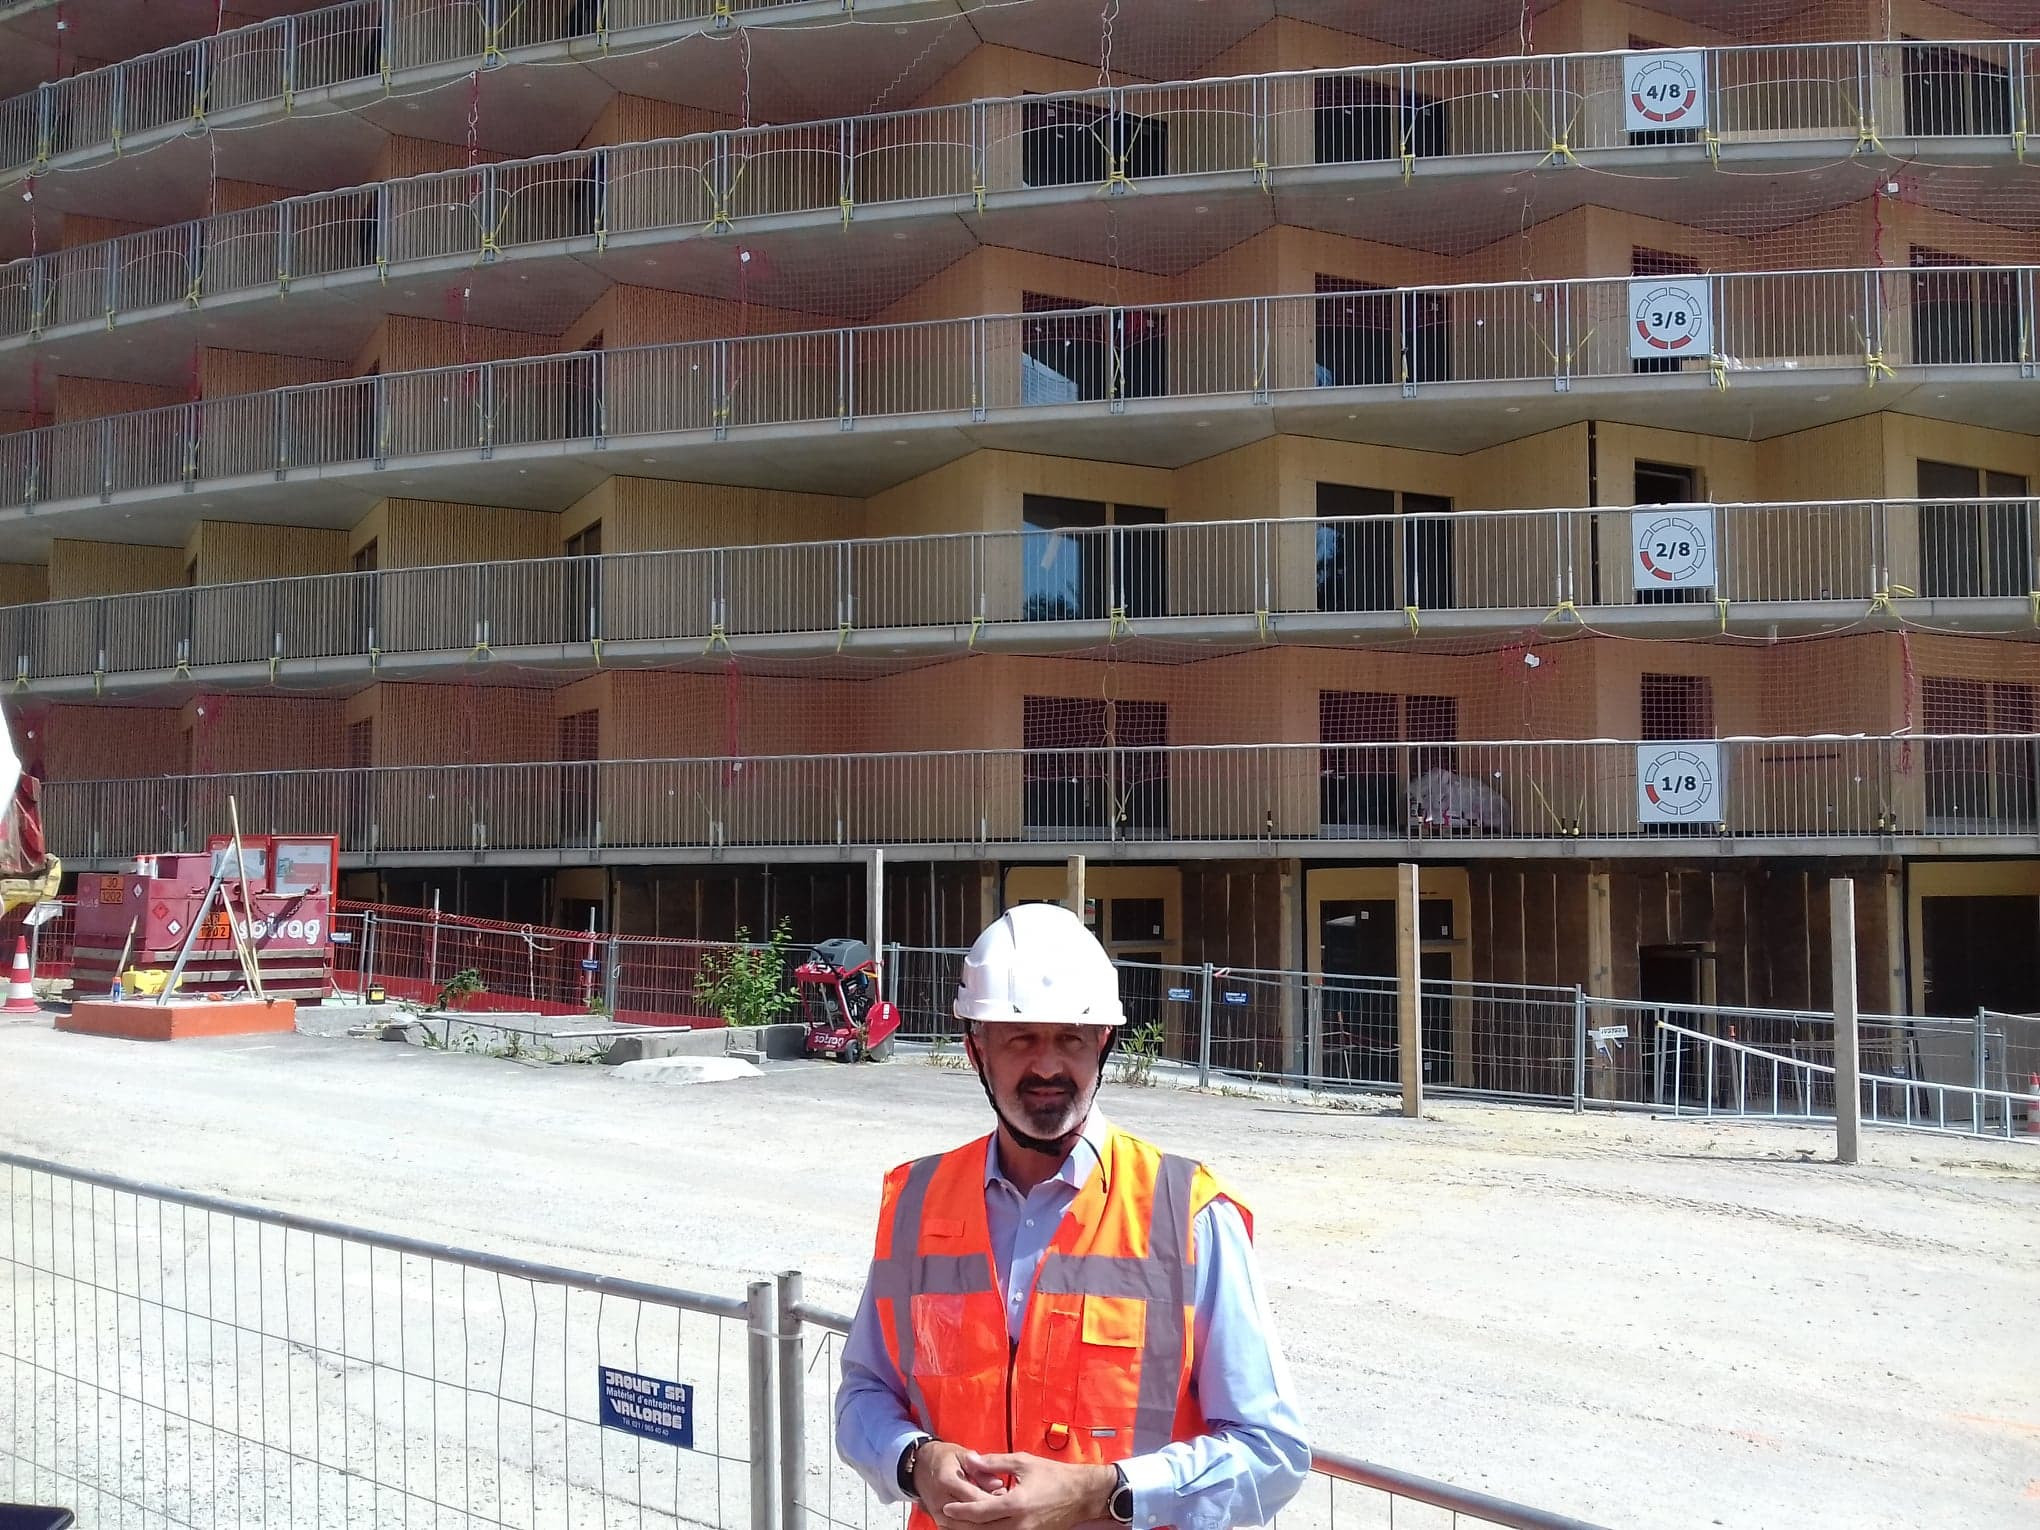 Lausanne 2020 chief executive Ian Logan has praised progress at the construction site ©ITG